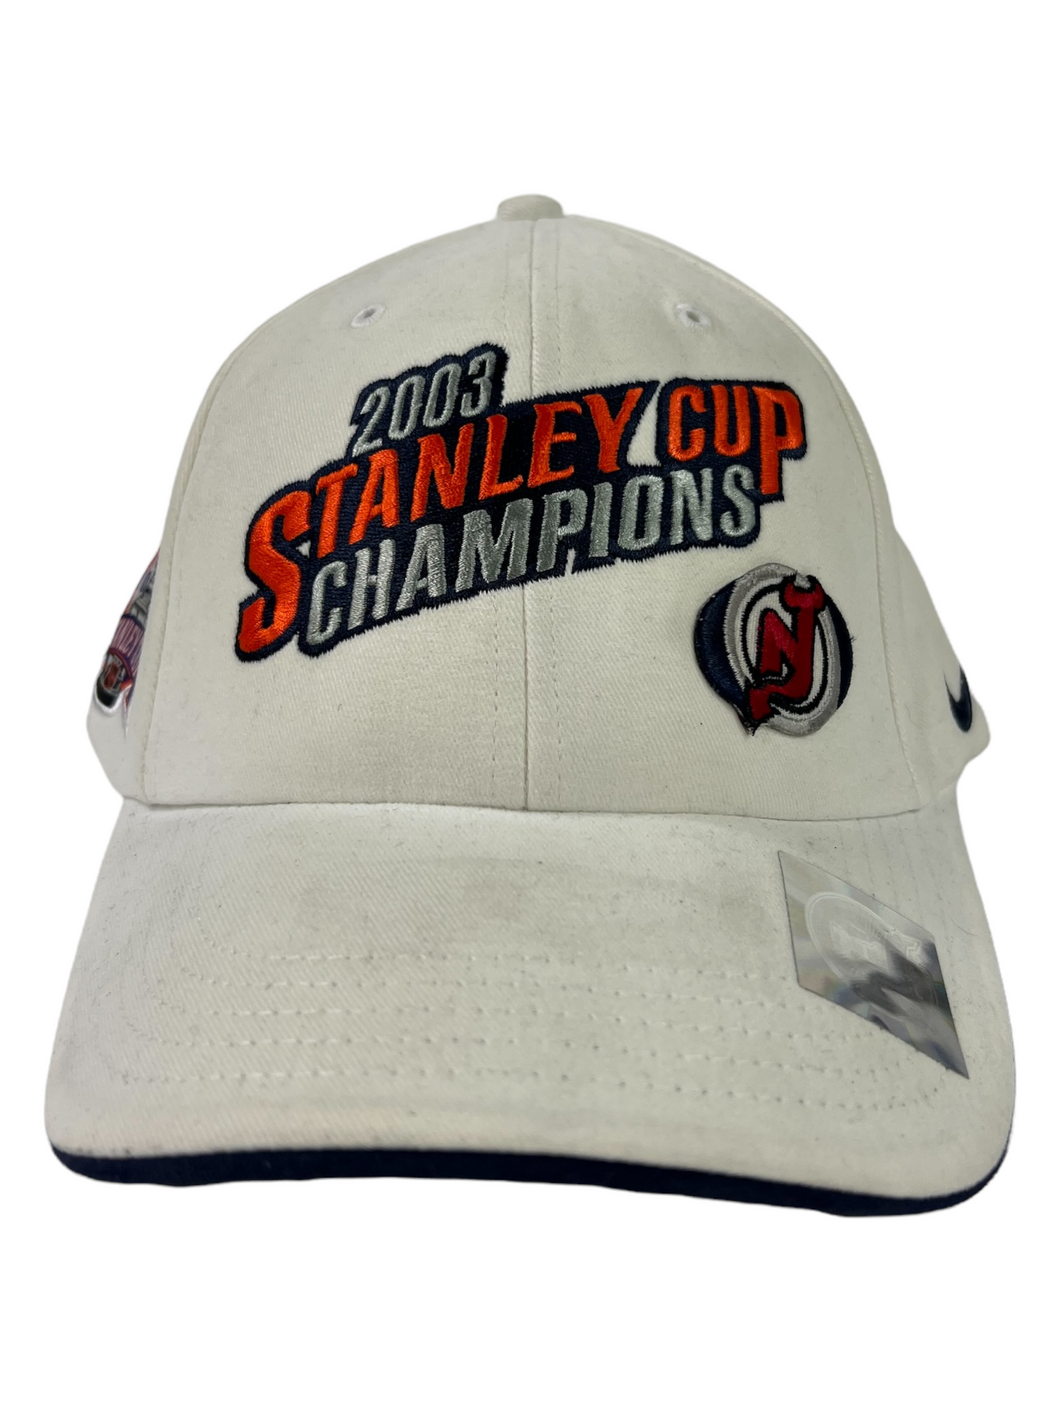 Vintage 2003 New Jersey Devils Stanley Cup champions Nike hockey rules StrapBack DS